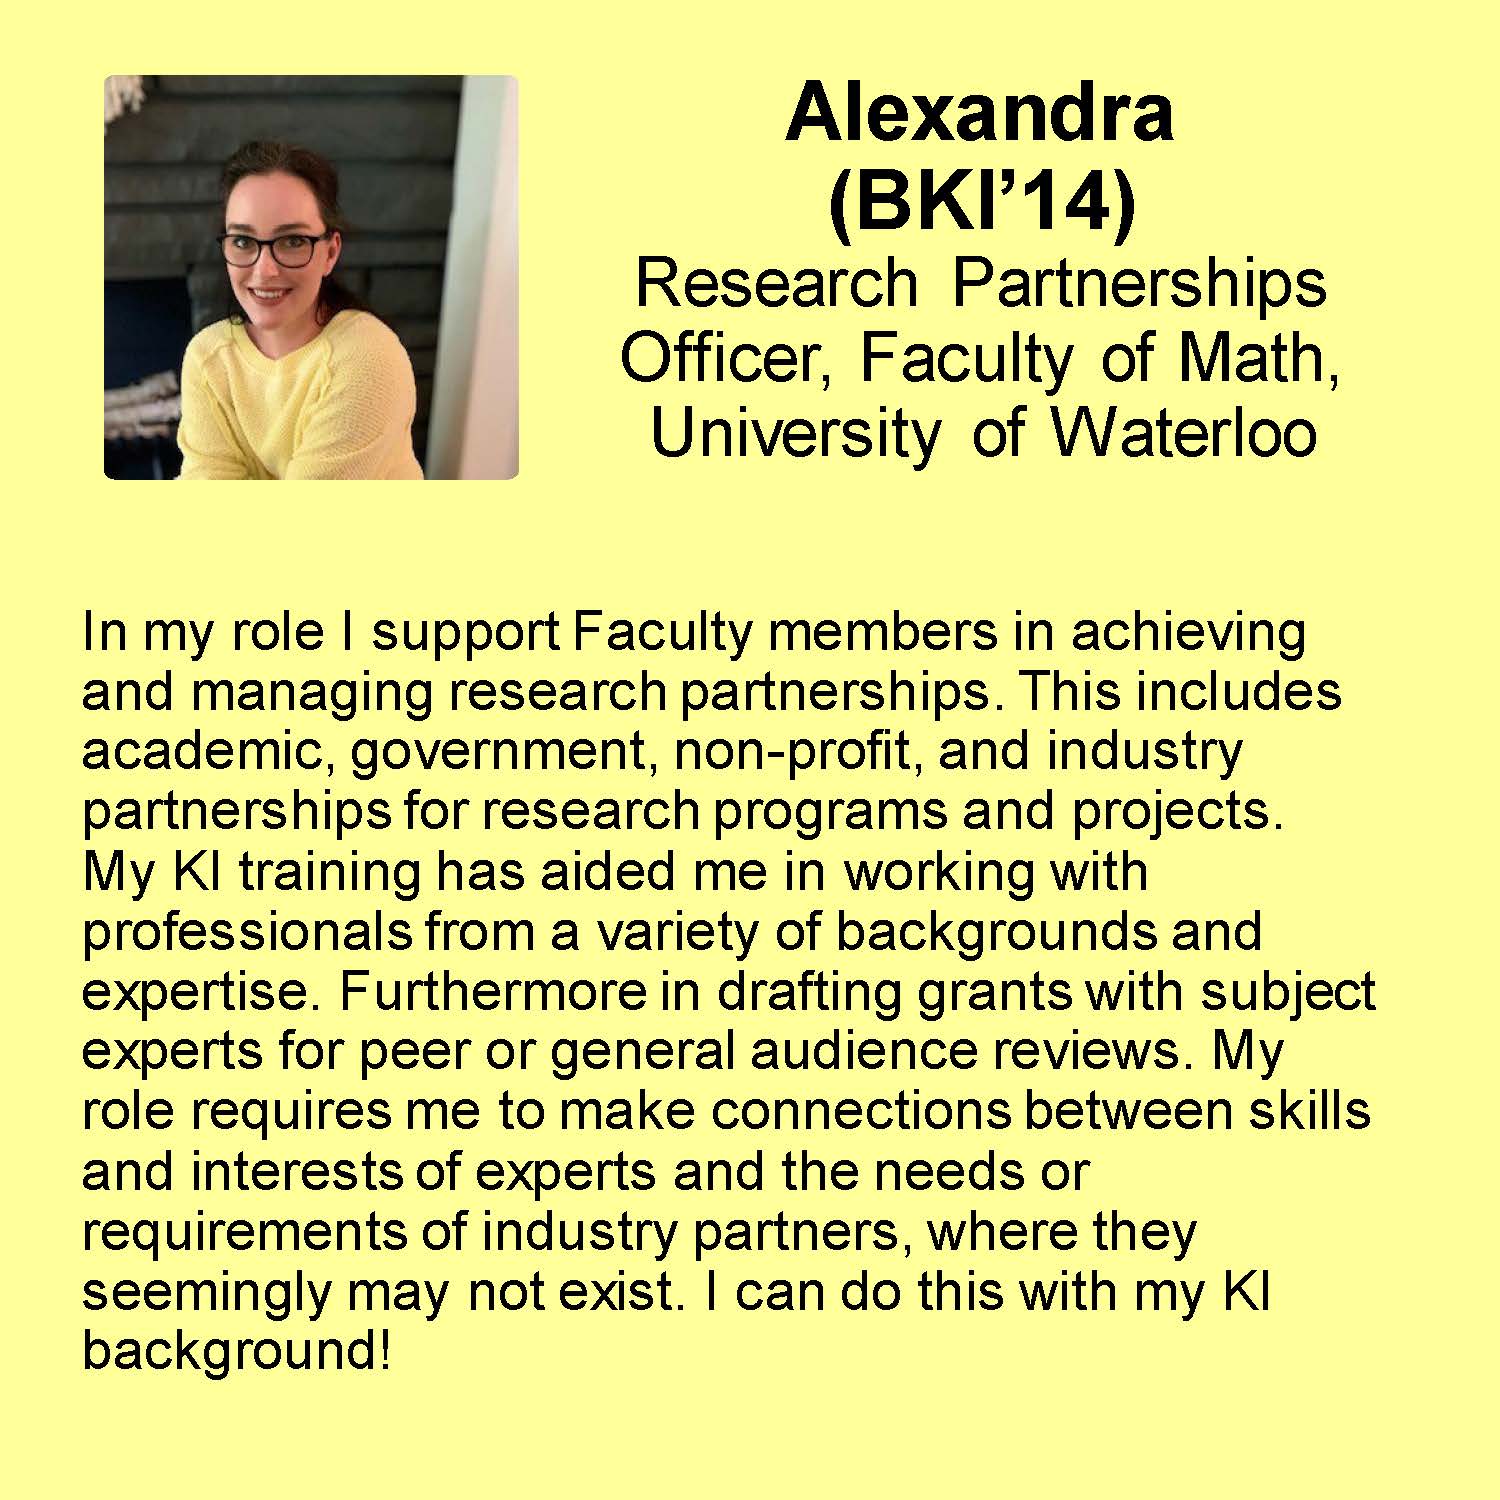 Alexandra profile Research Partnerships Officer, Faculty of Math, University of Waterloo